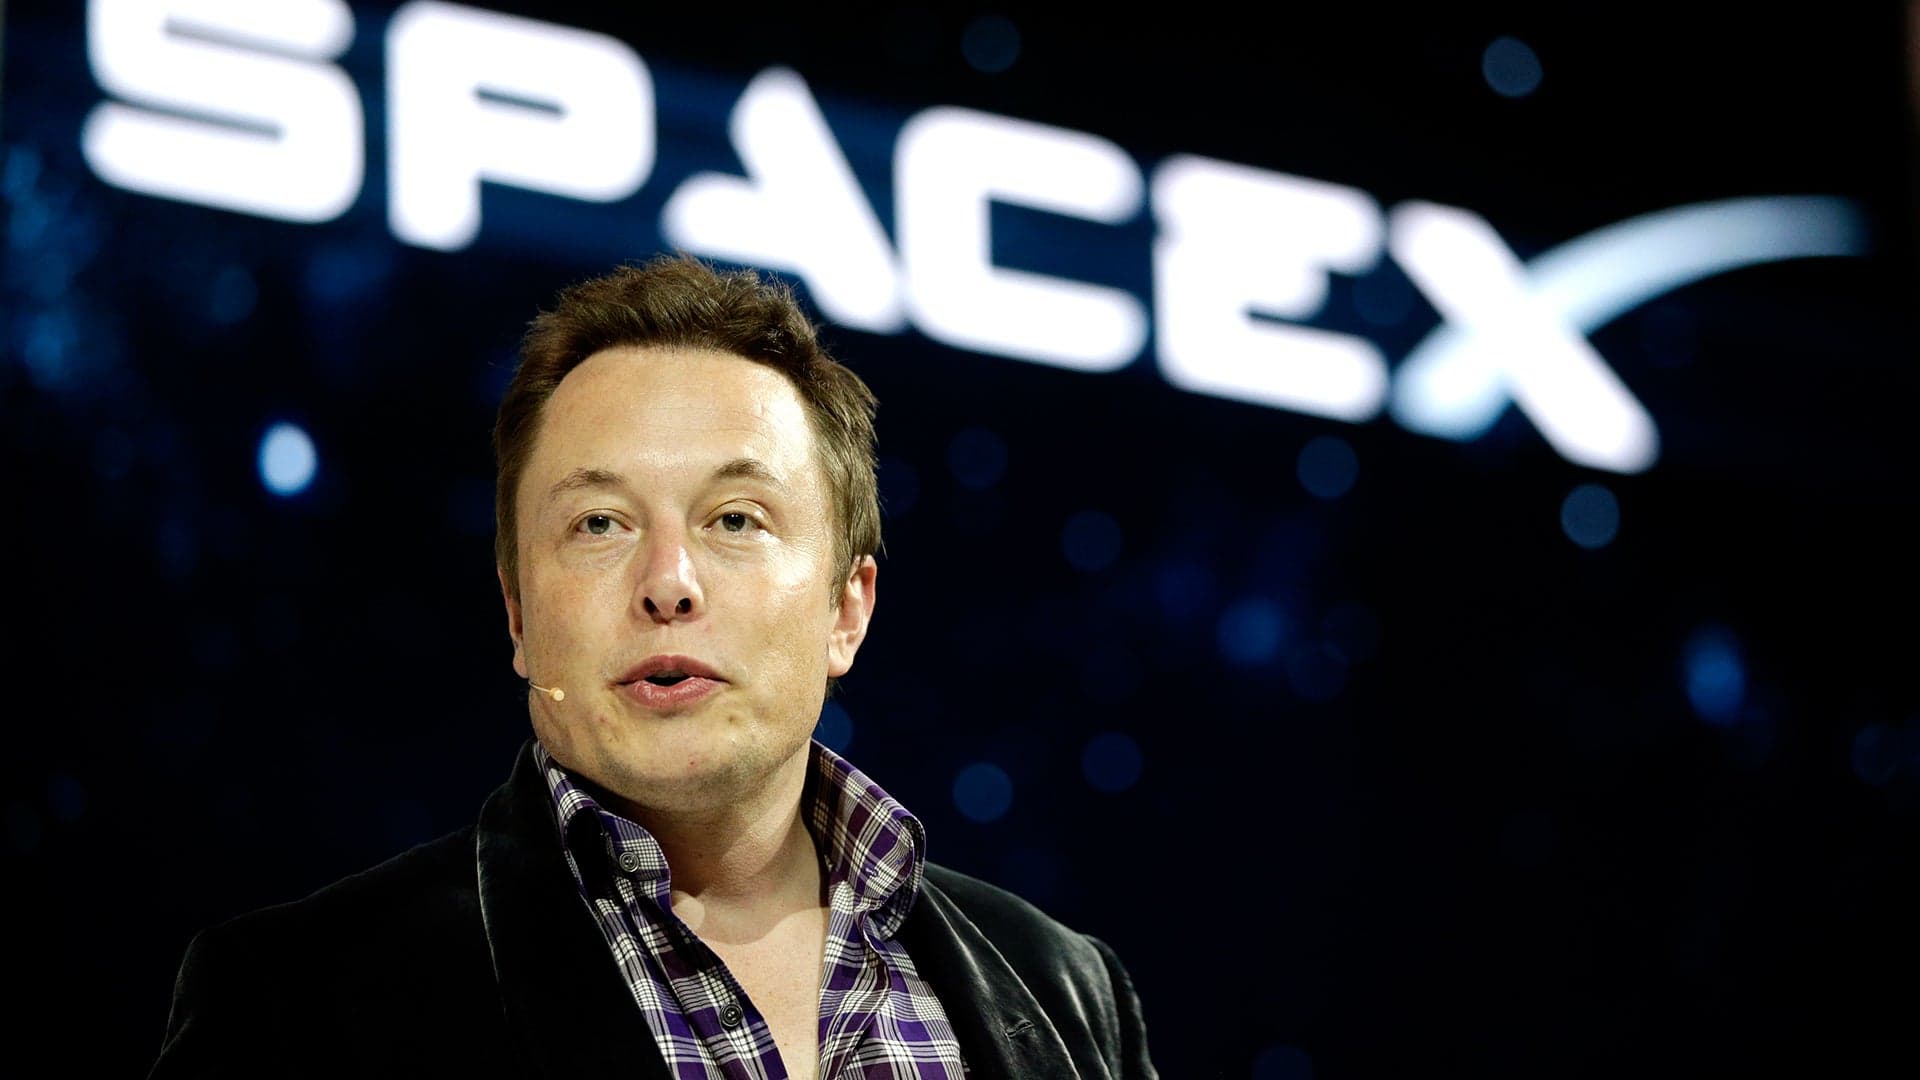 Elon Musk Wants to Send People to Mars by 2024